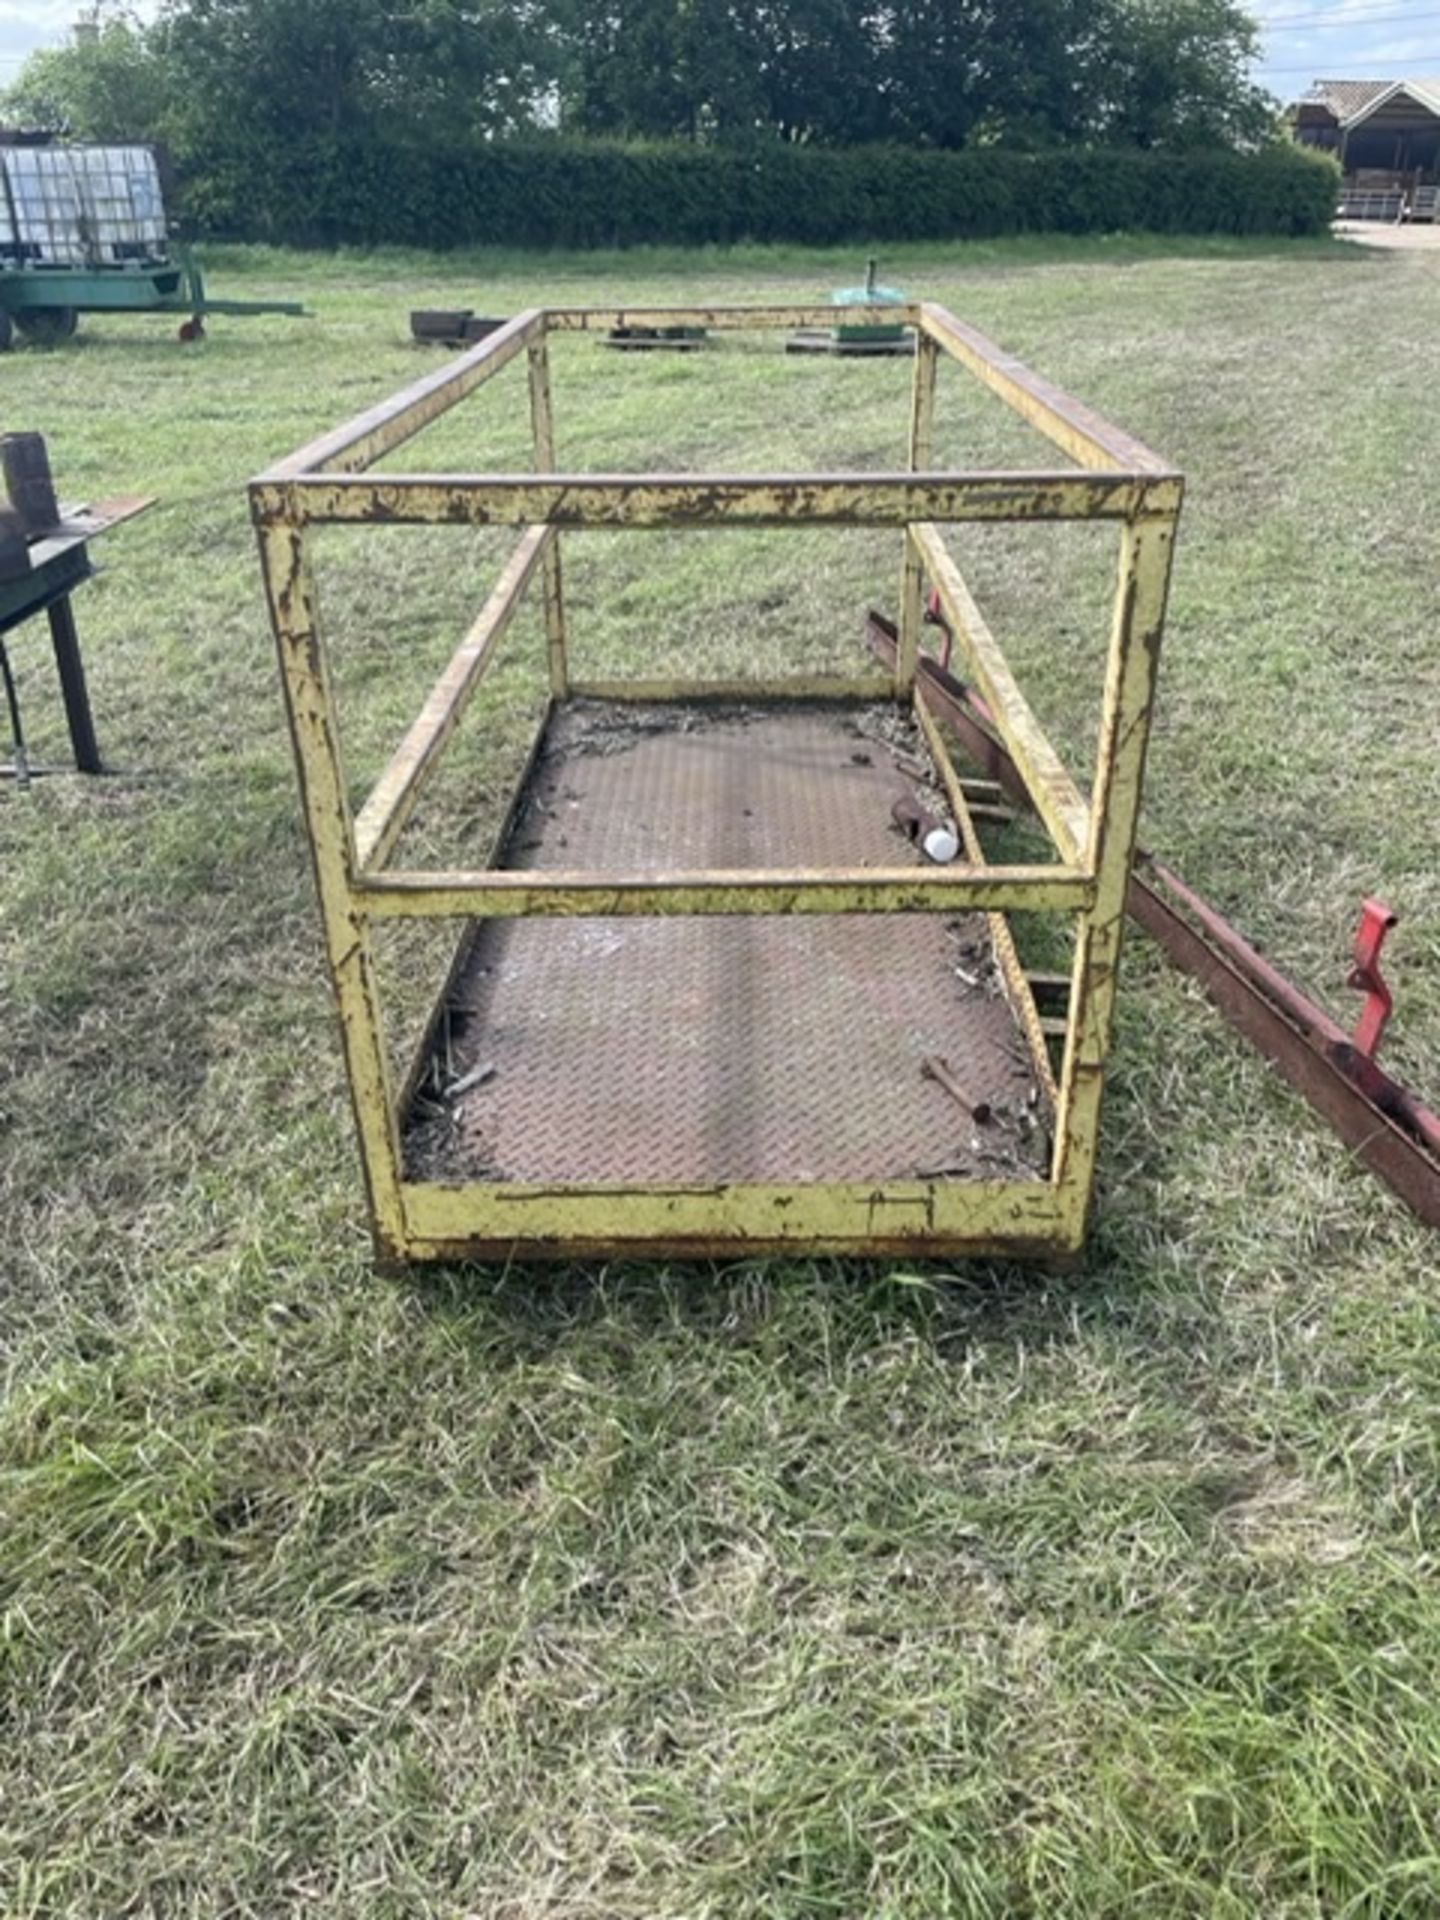 Homemade Personnel Cage - Image 3 of 3